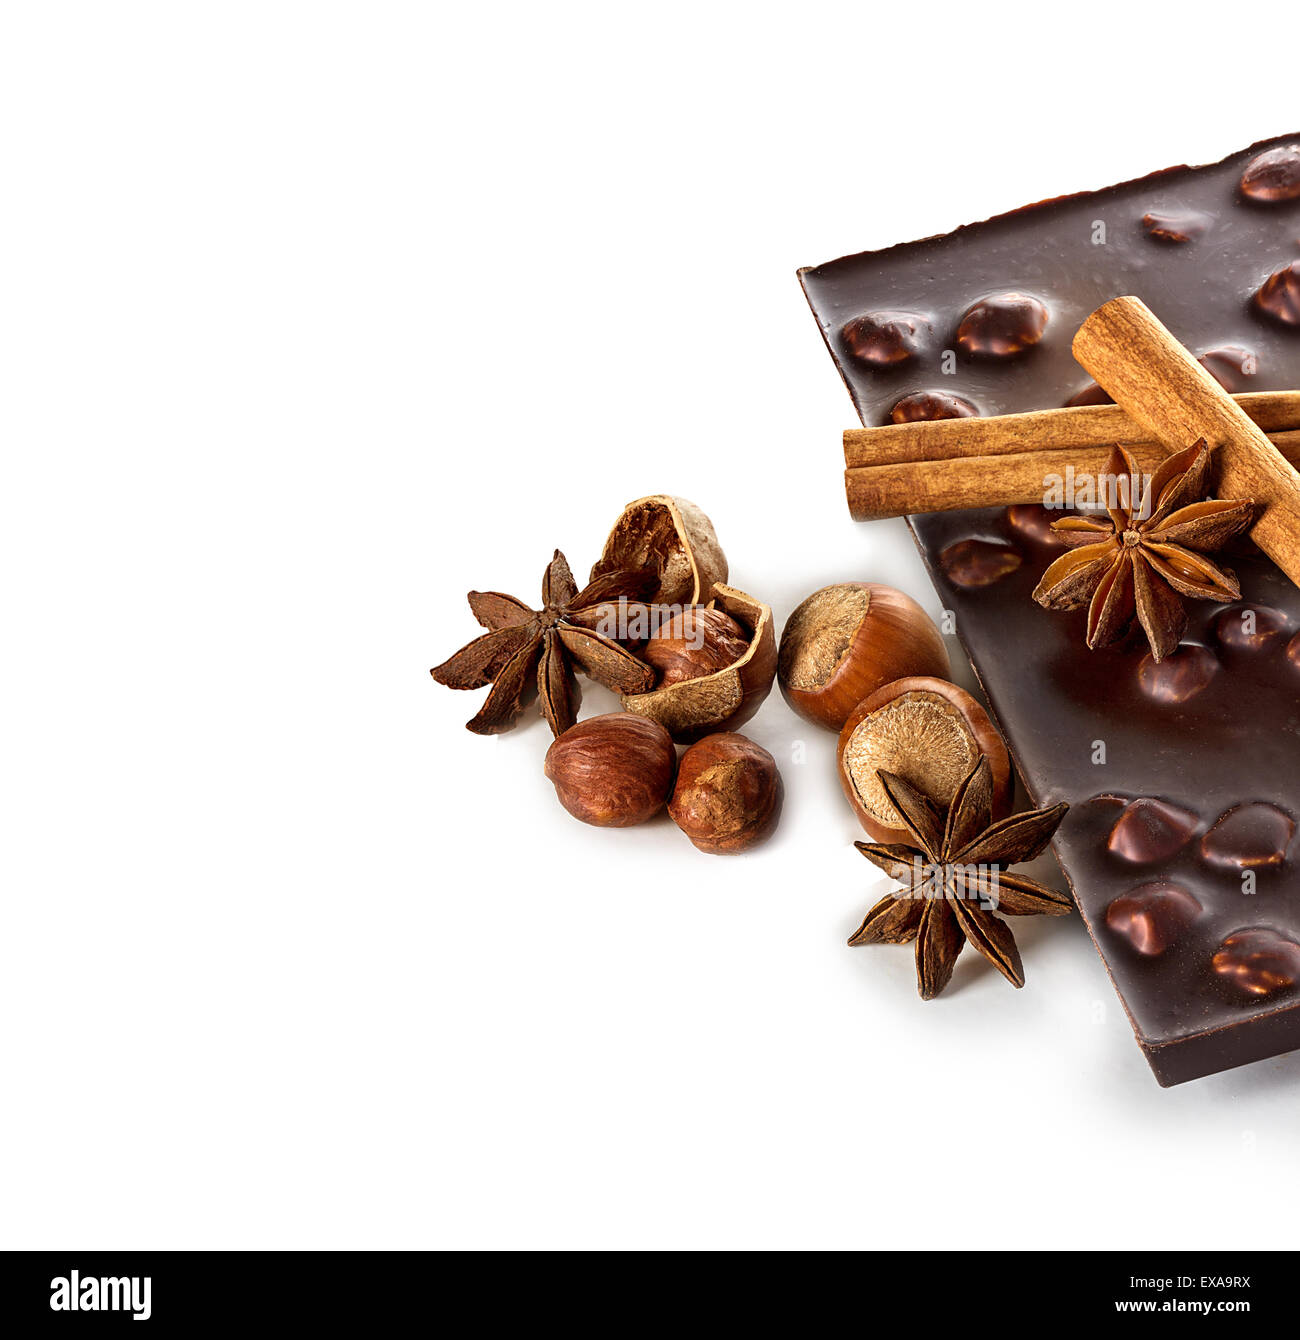 Chocolate and nuts with cinnamon sticks, star anise isolated Stock Photo